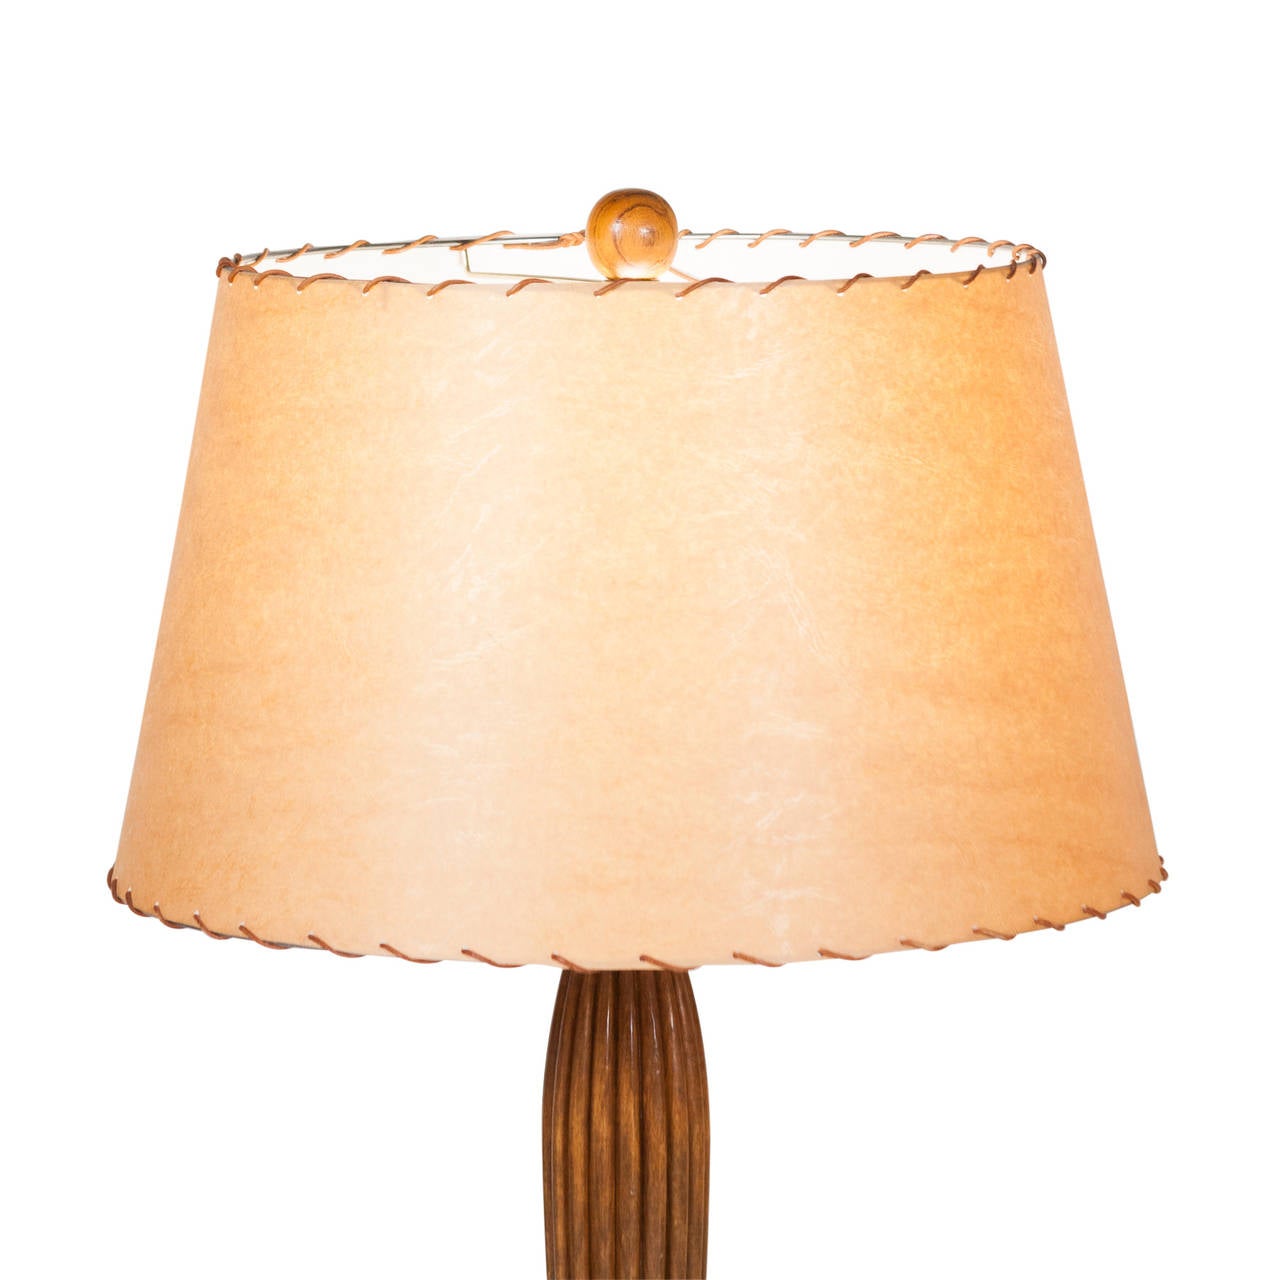 Italian Fluted Column Fruitwood Table Lamps, Pair For Sale 4